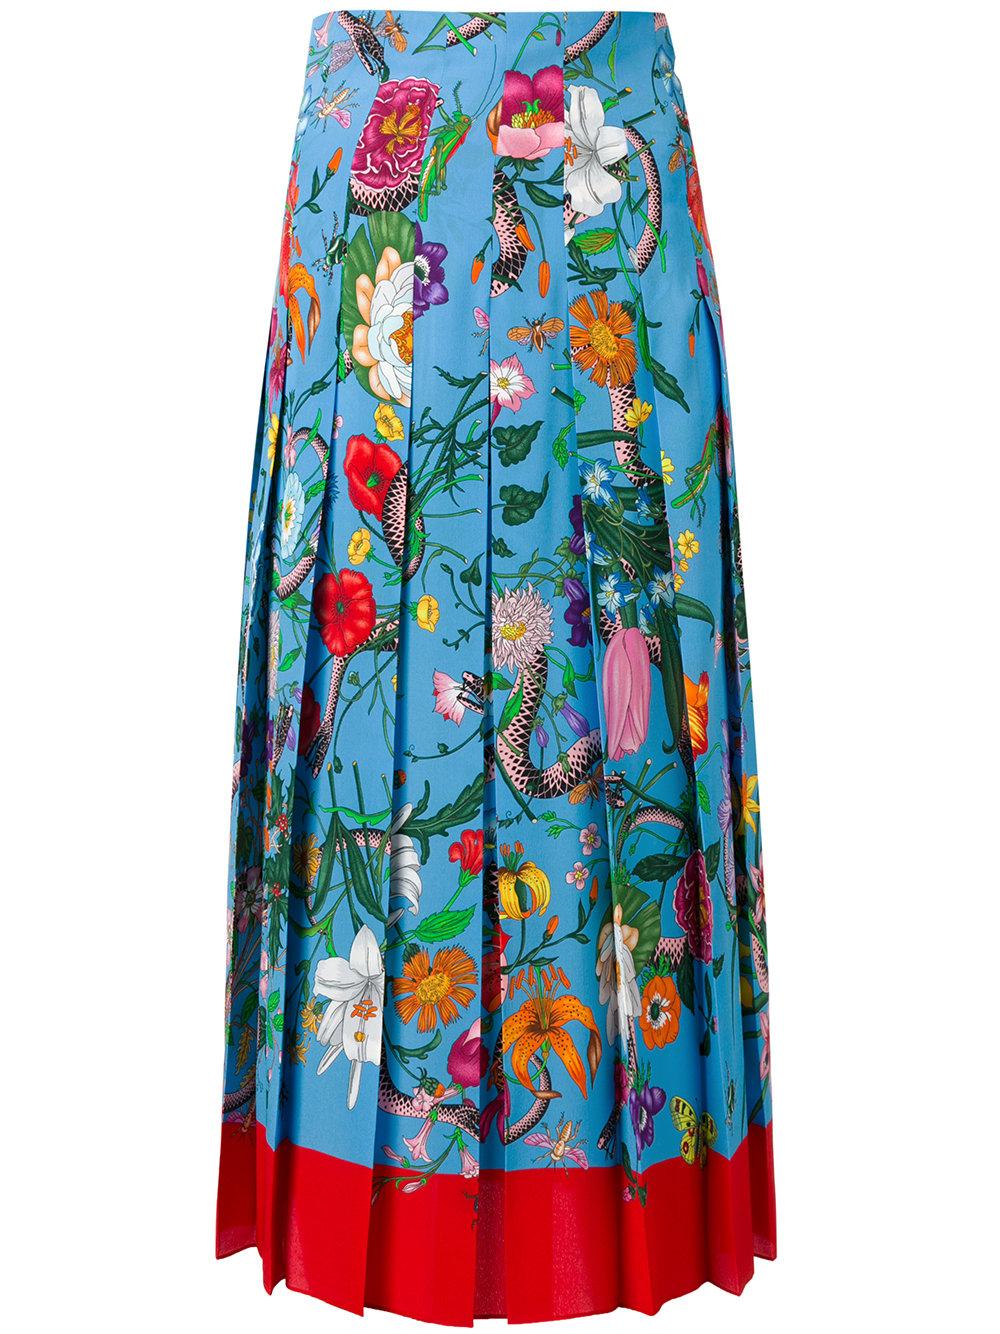 Gucci Floral Print Skirt in Blue | Lyst